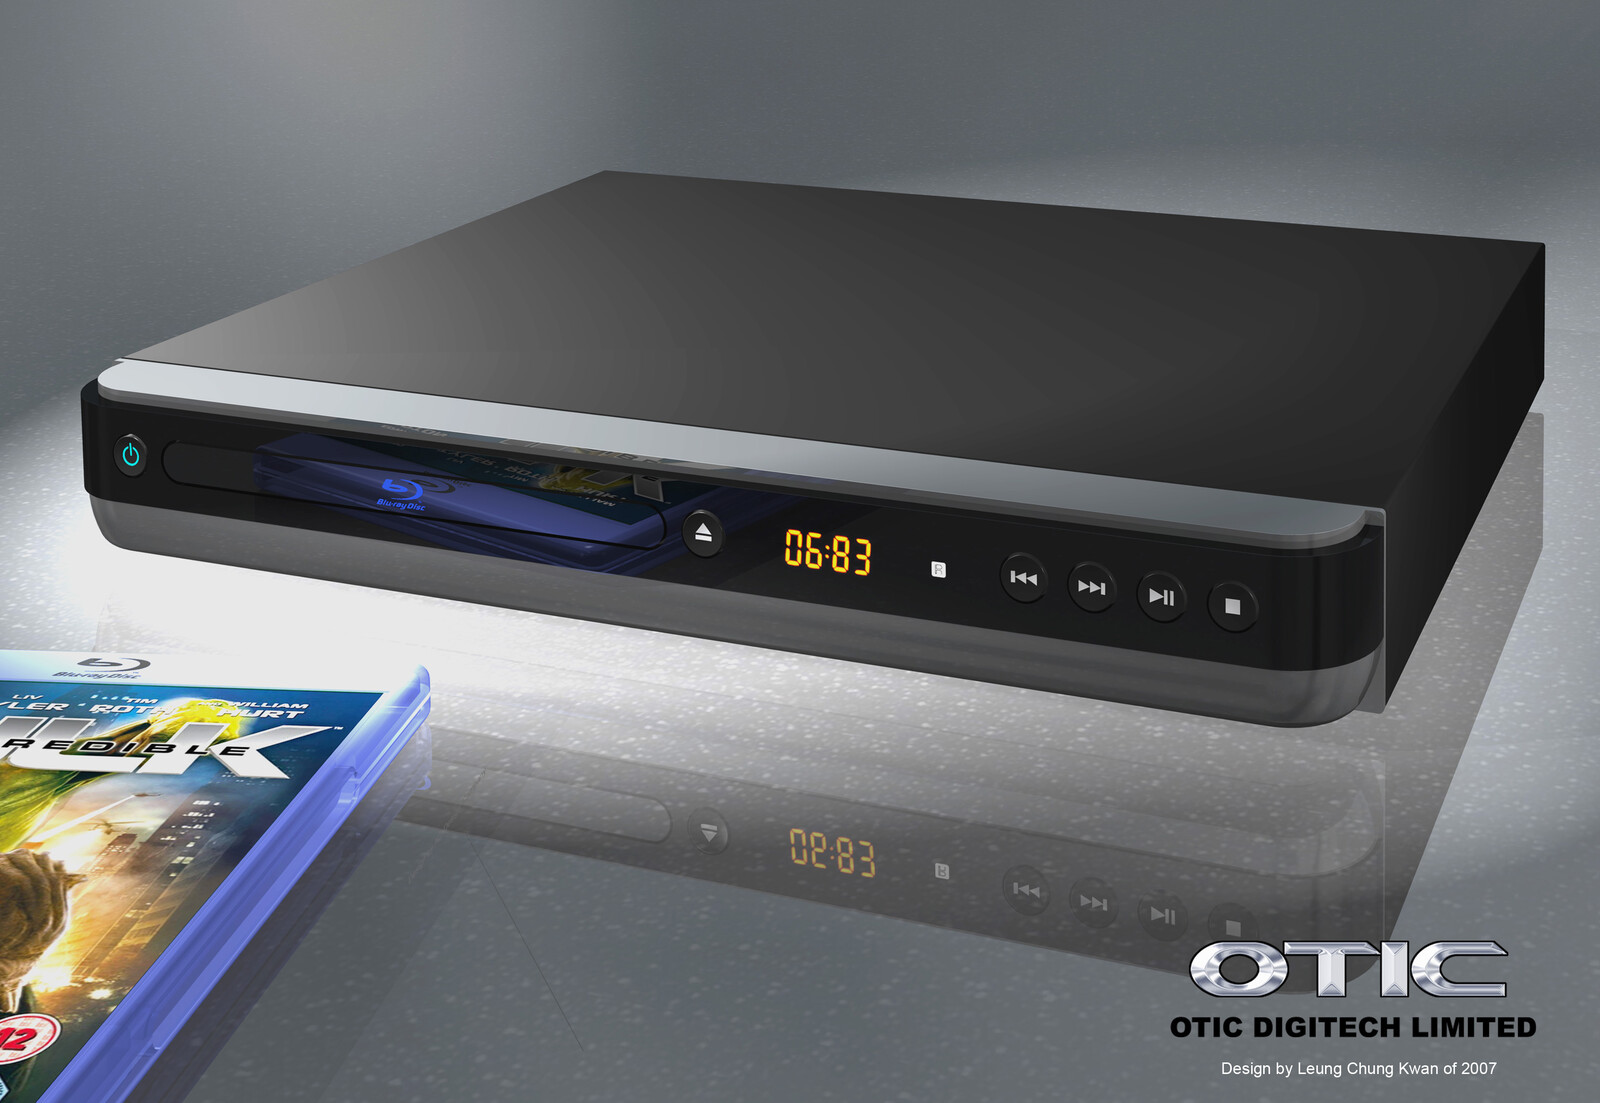 💎 Stand-Alone Blu-Ray Player | Design by Leung Chung Kwan on 2007 💎
Brand Name︰OTIC | Client︰OTIC Limited